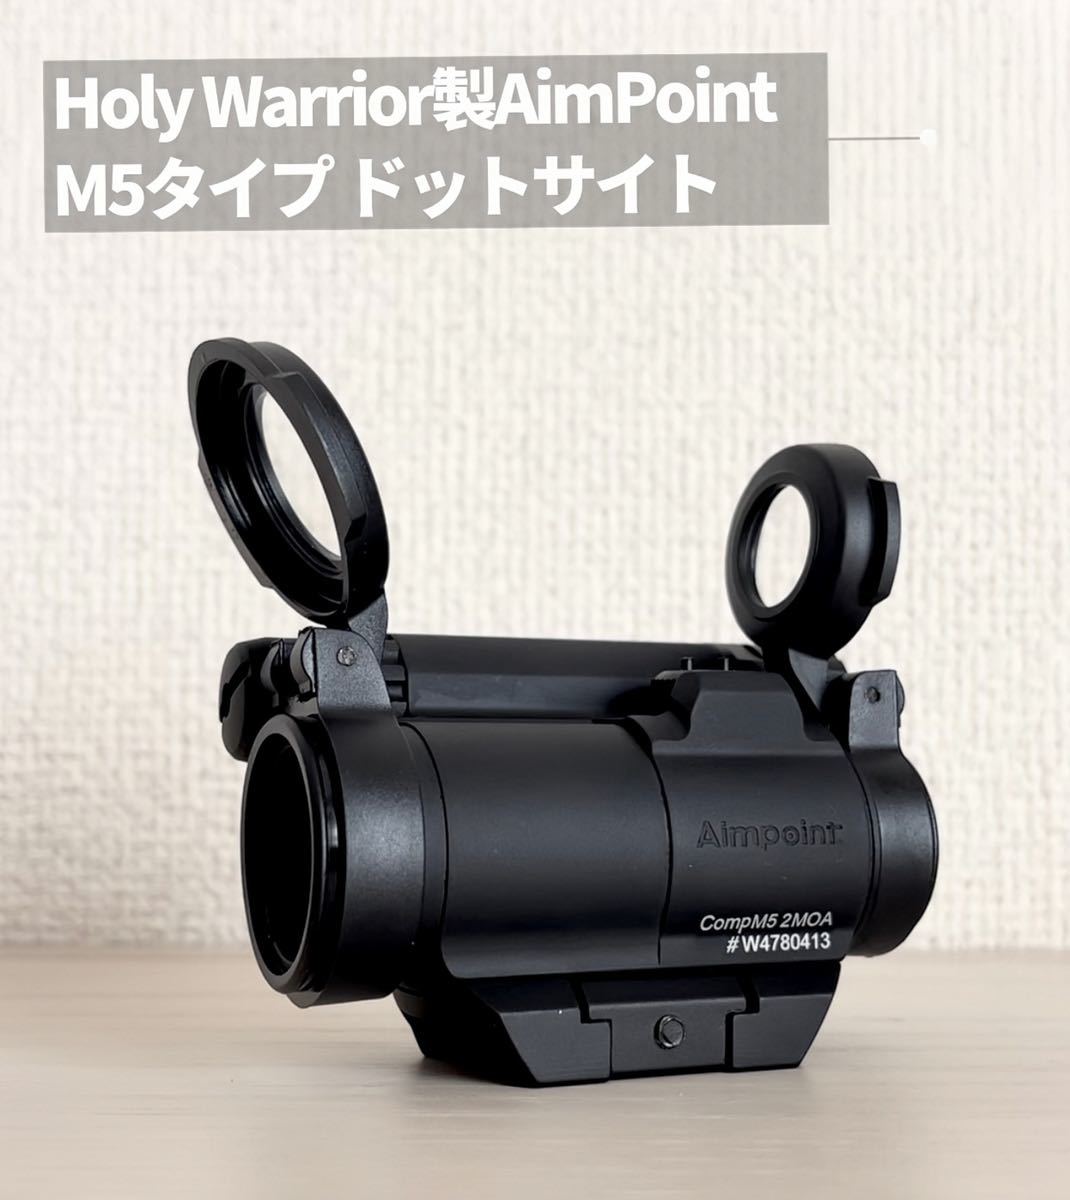 Holy Warrior made AimPoint M5 type dot site 